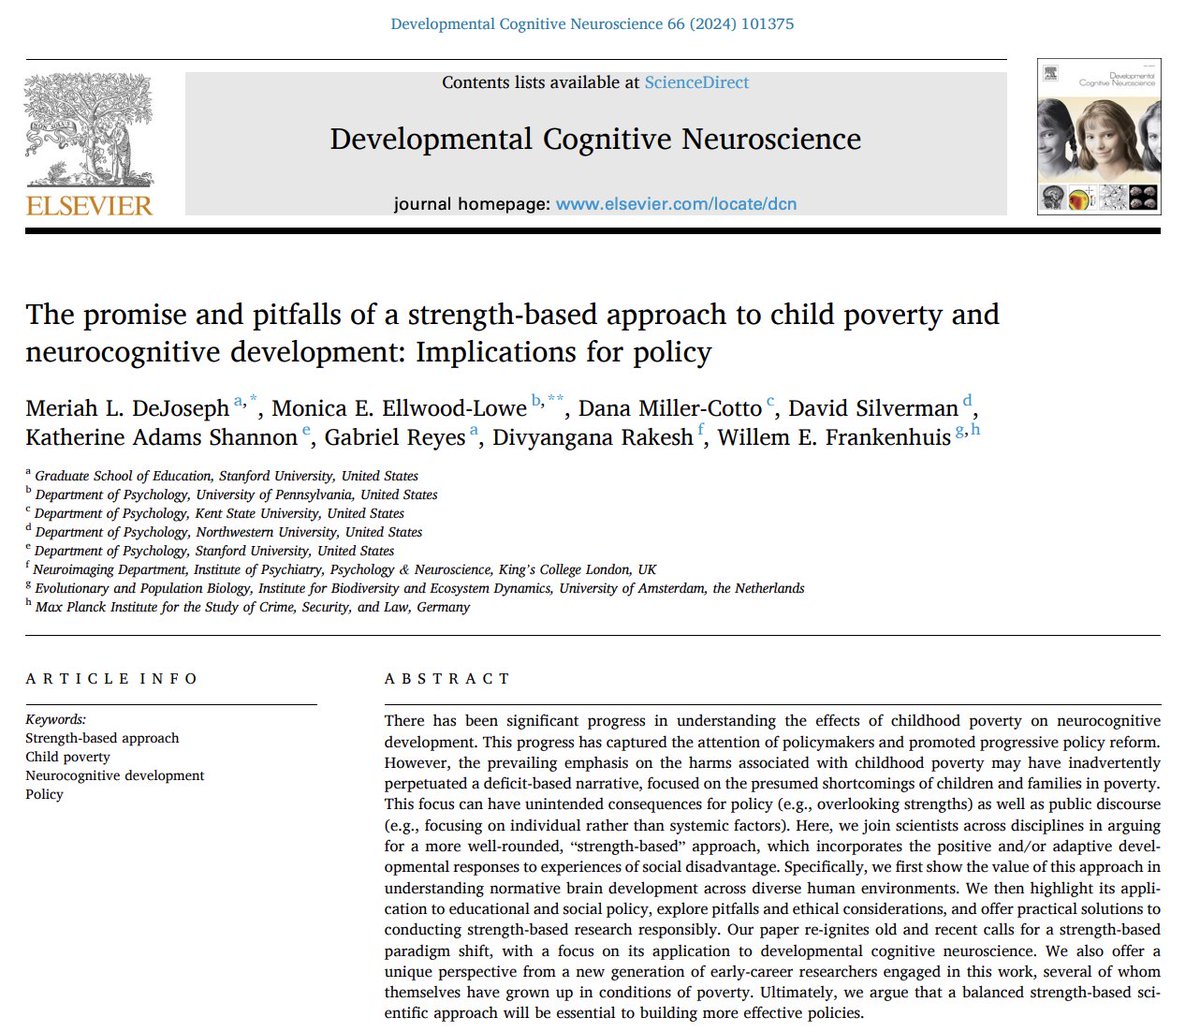 ✨New paper co-led w/ @mellwoodlowe out now! Here we bridge the emerging strength-based science of poverty to developmental cognitive neuroscience, and ultimately towards more humanistic, sensitive, & respectful policies that foster children’s thriving.🪡 sciencedirect.com/science/articl…